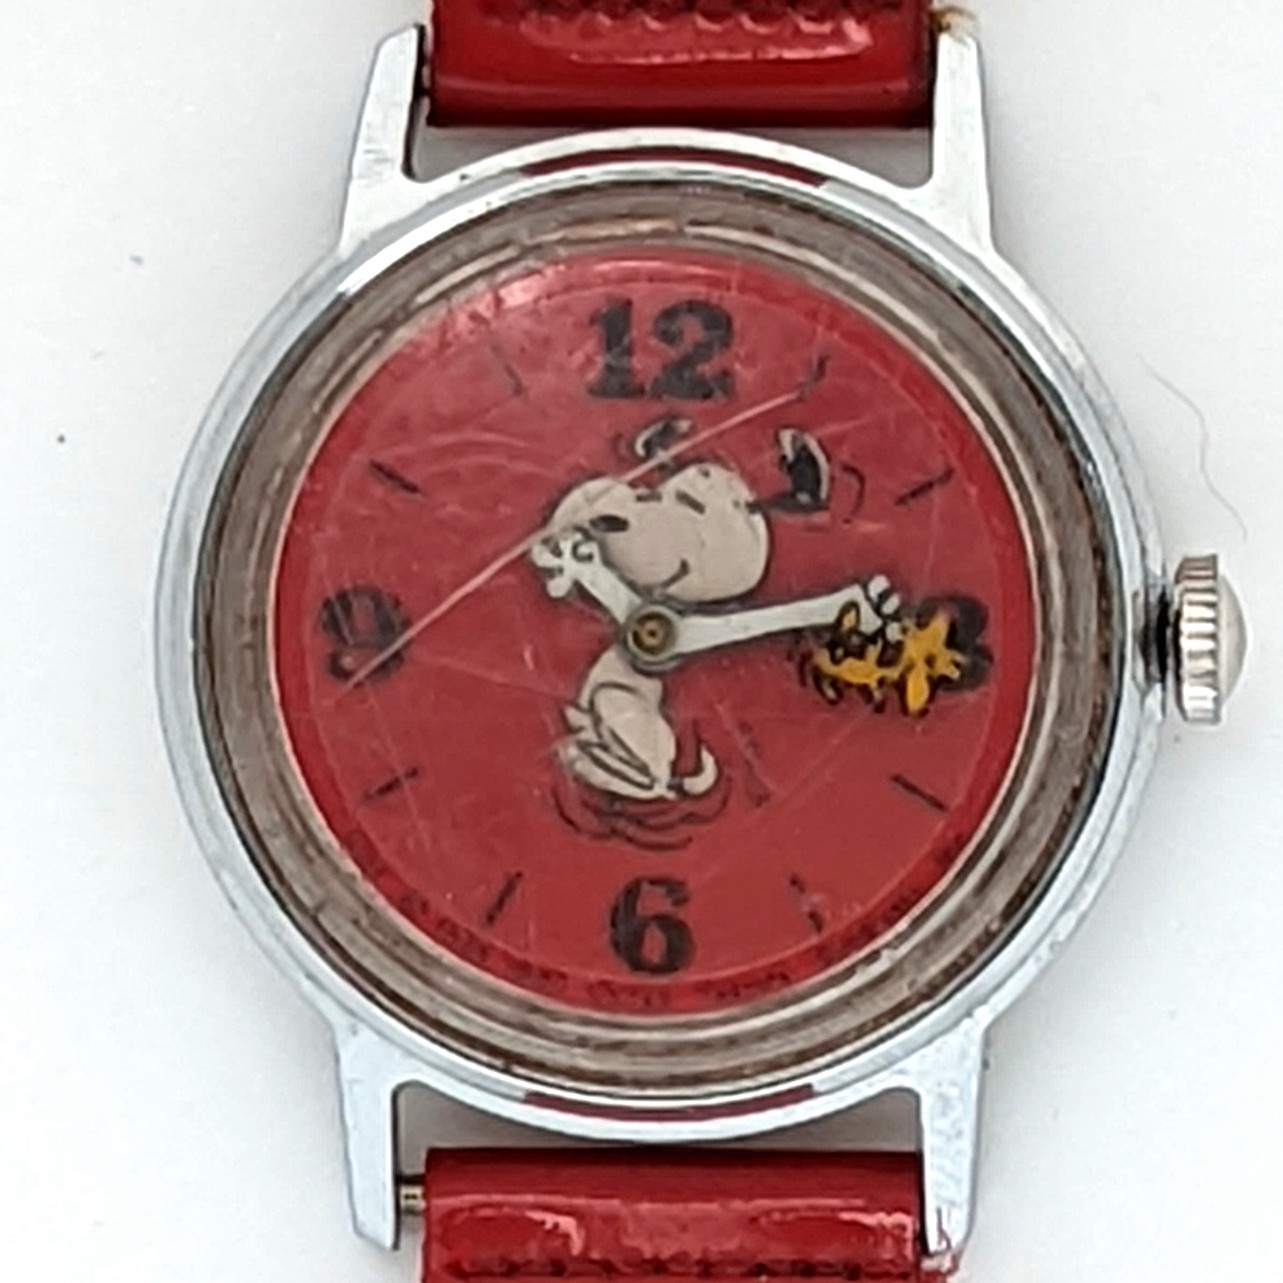 Timex Sprite 39015 02476 [1976] Snoopy and Woodstock Watch